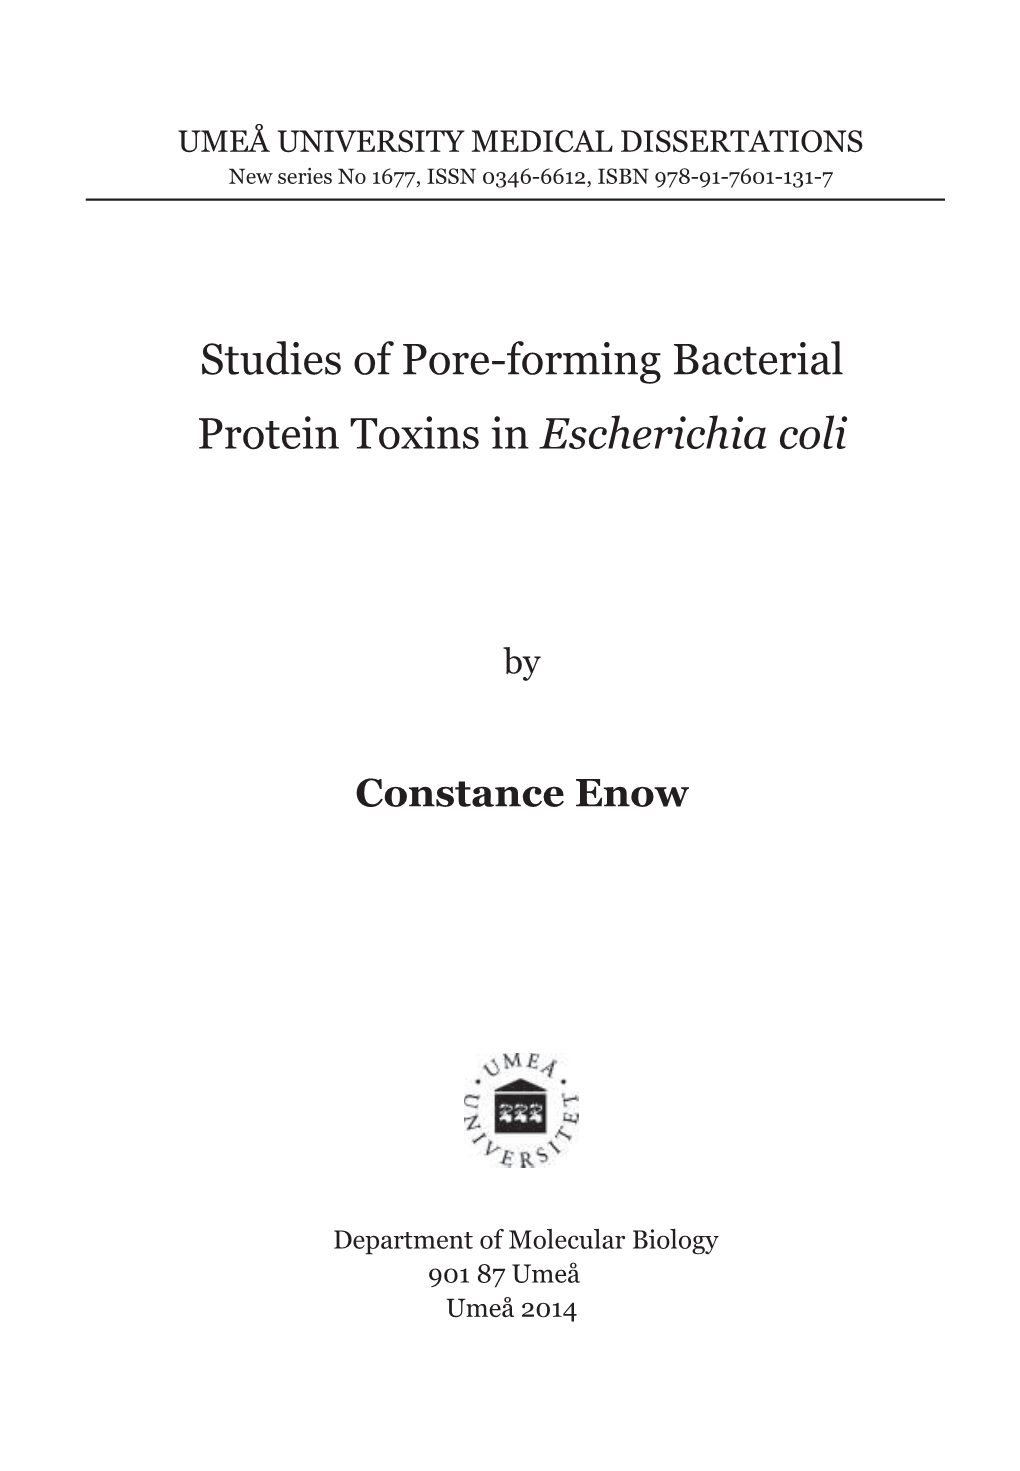 Studies of Pore-Forming Bacterial Protein Toxins in Escherichia Coli